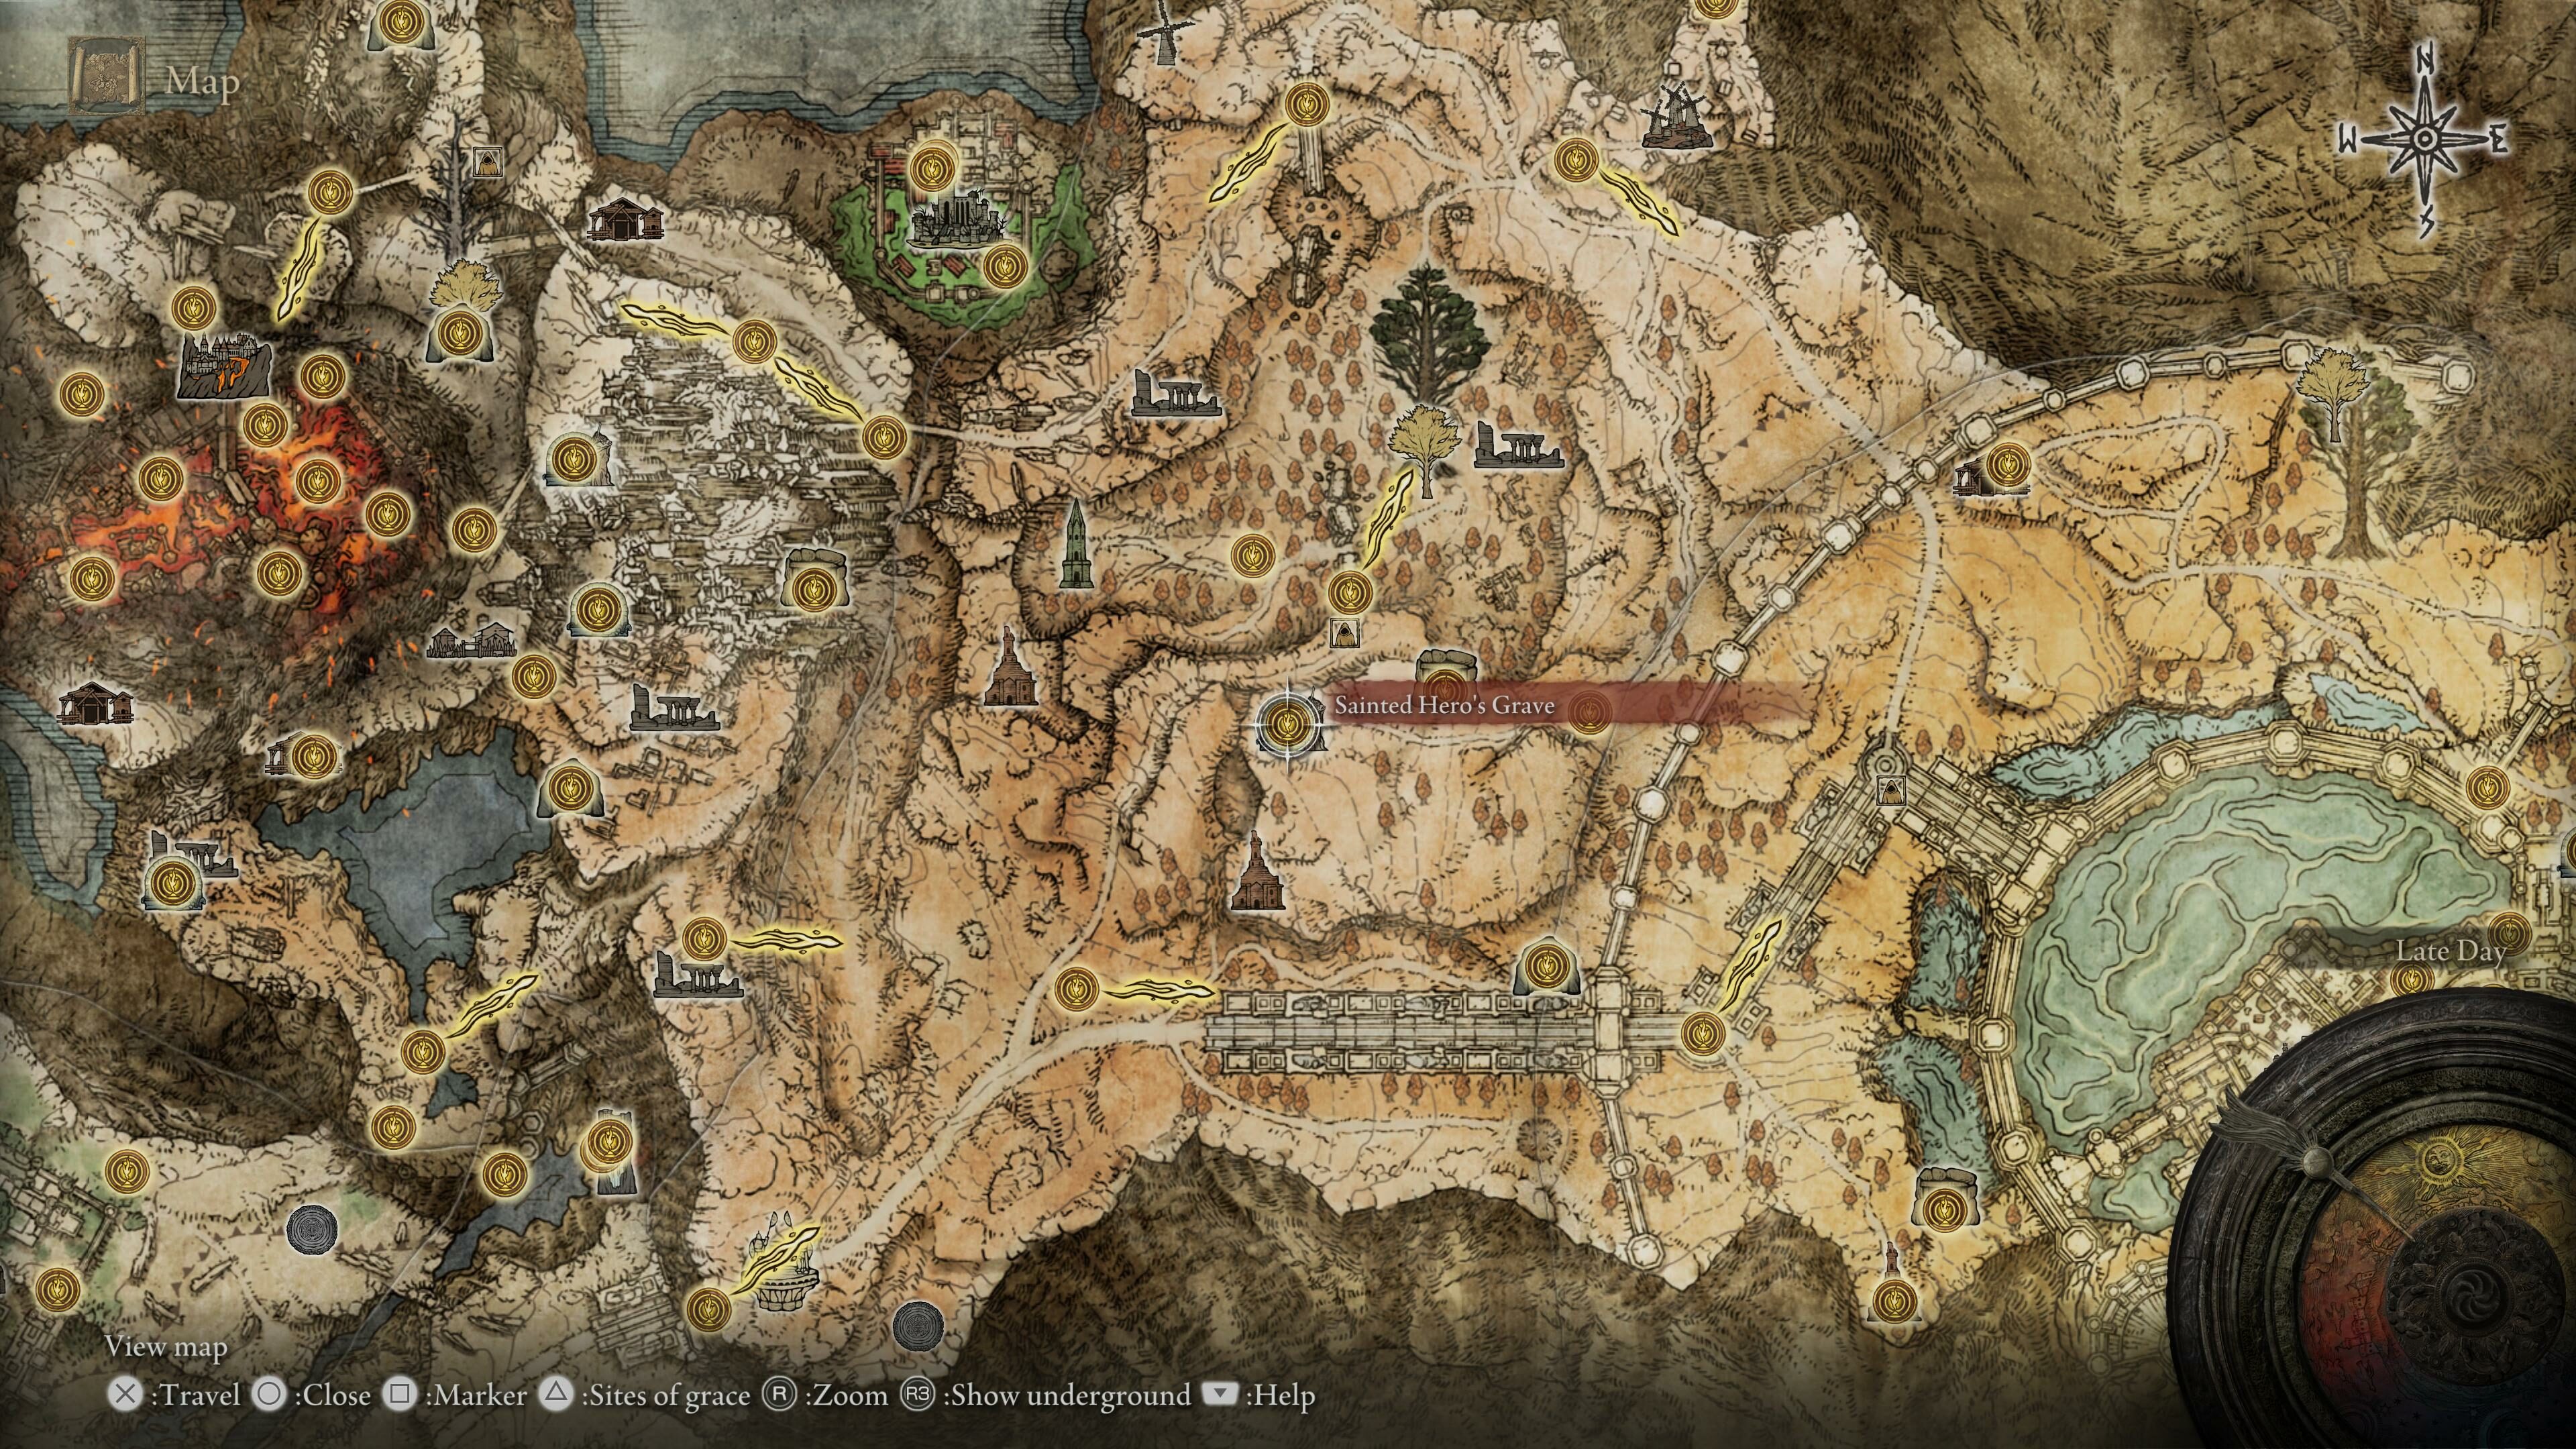 elden ring map - detailed information from the game showing the world map